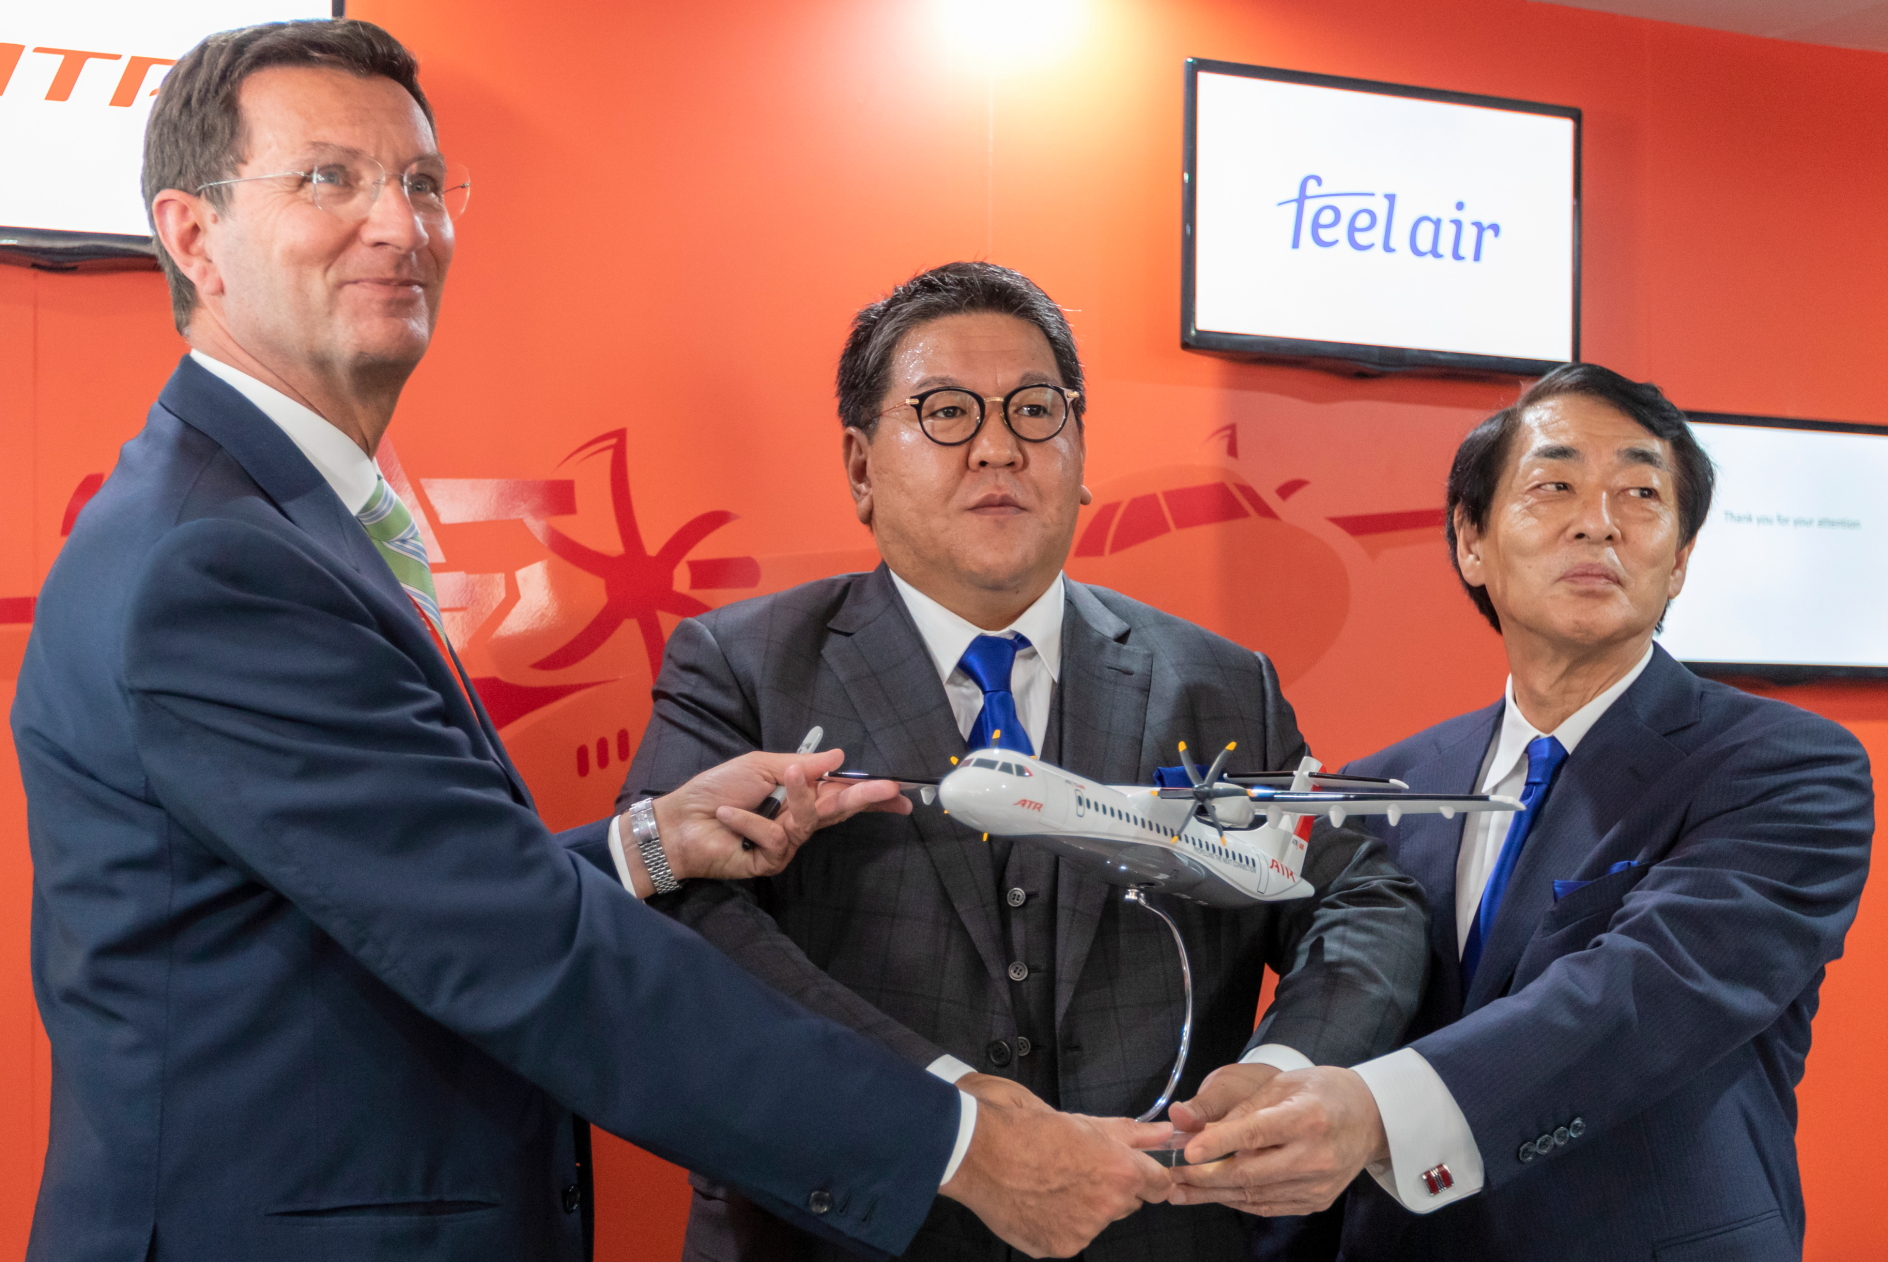 ATR has signed a LOI for up to 36 aircraft with Feel Air Holdings, a new regional airline holding company in Japan. Click to enlarge.